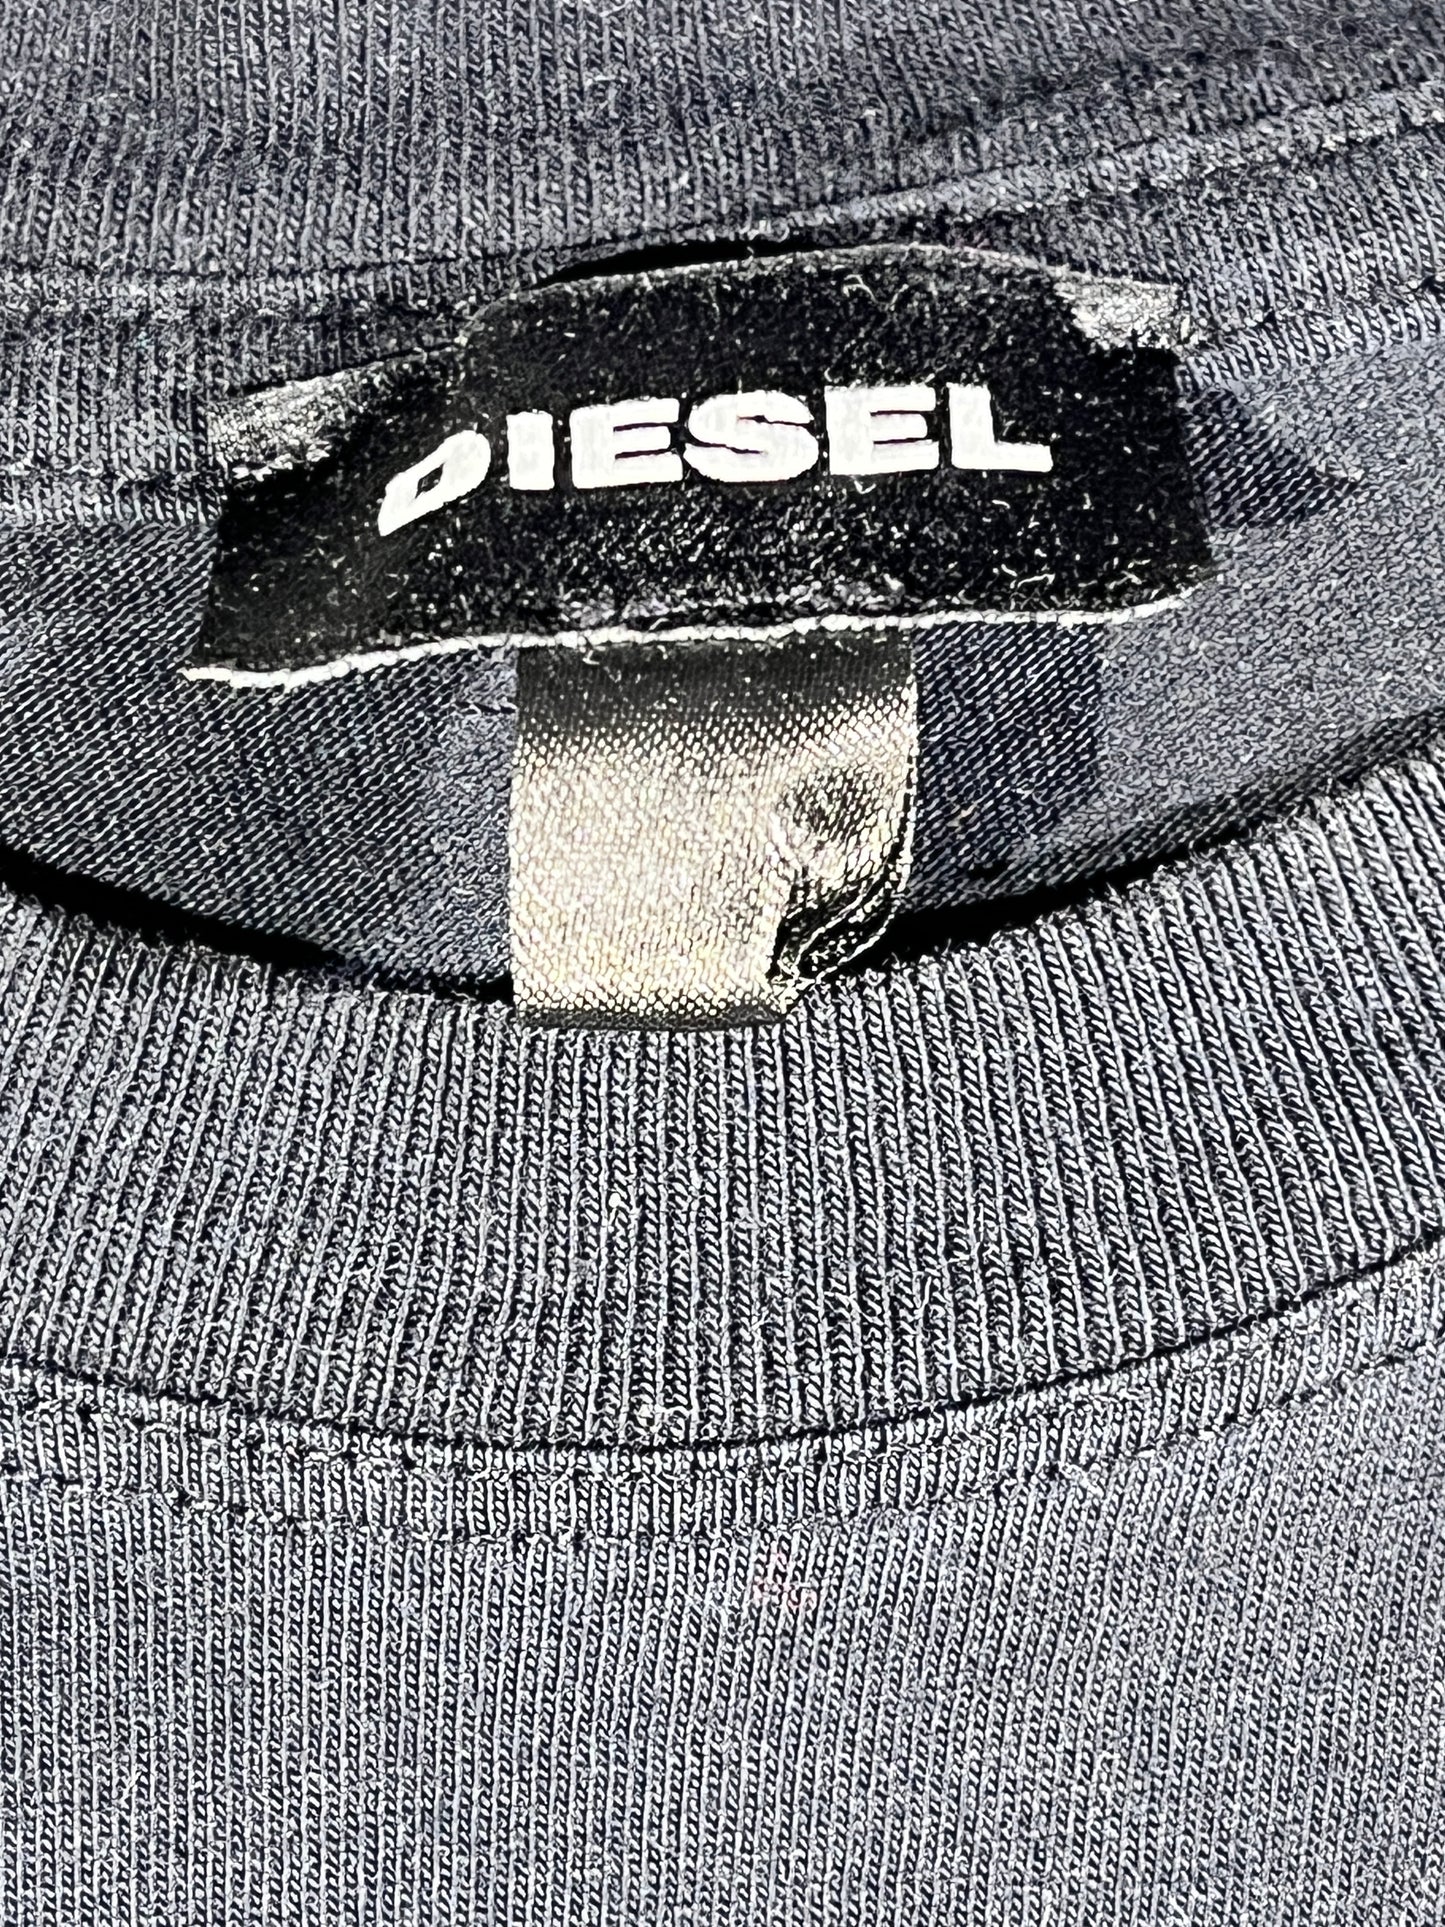 Vintage Diesel T-Shirt Raised Stitching Only The Brave